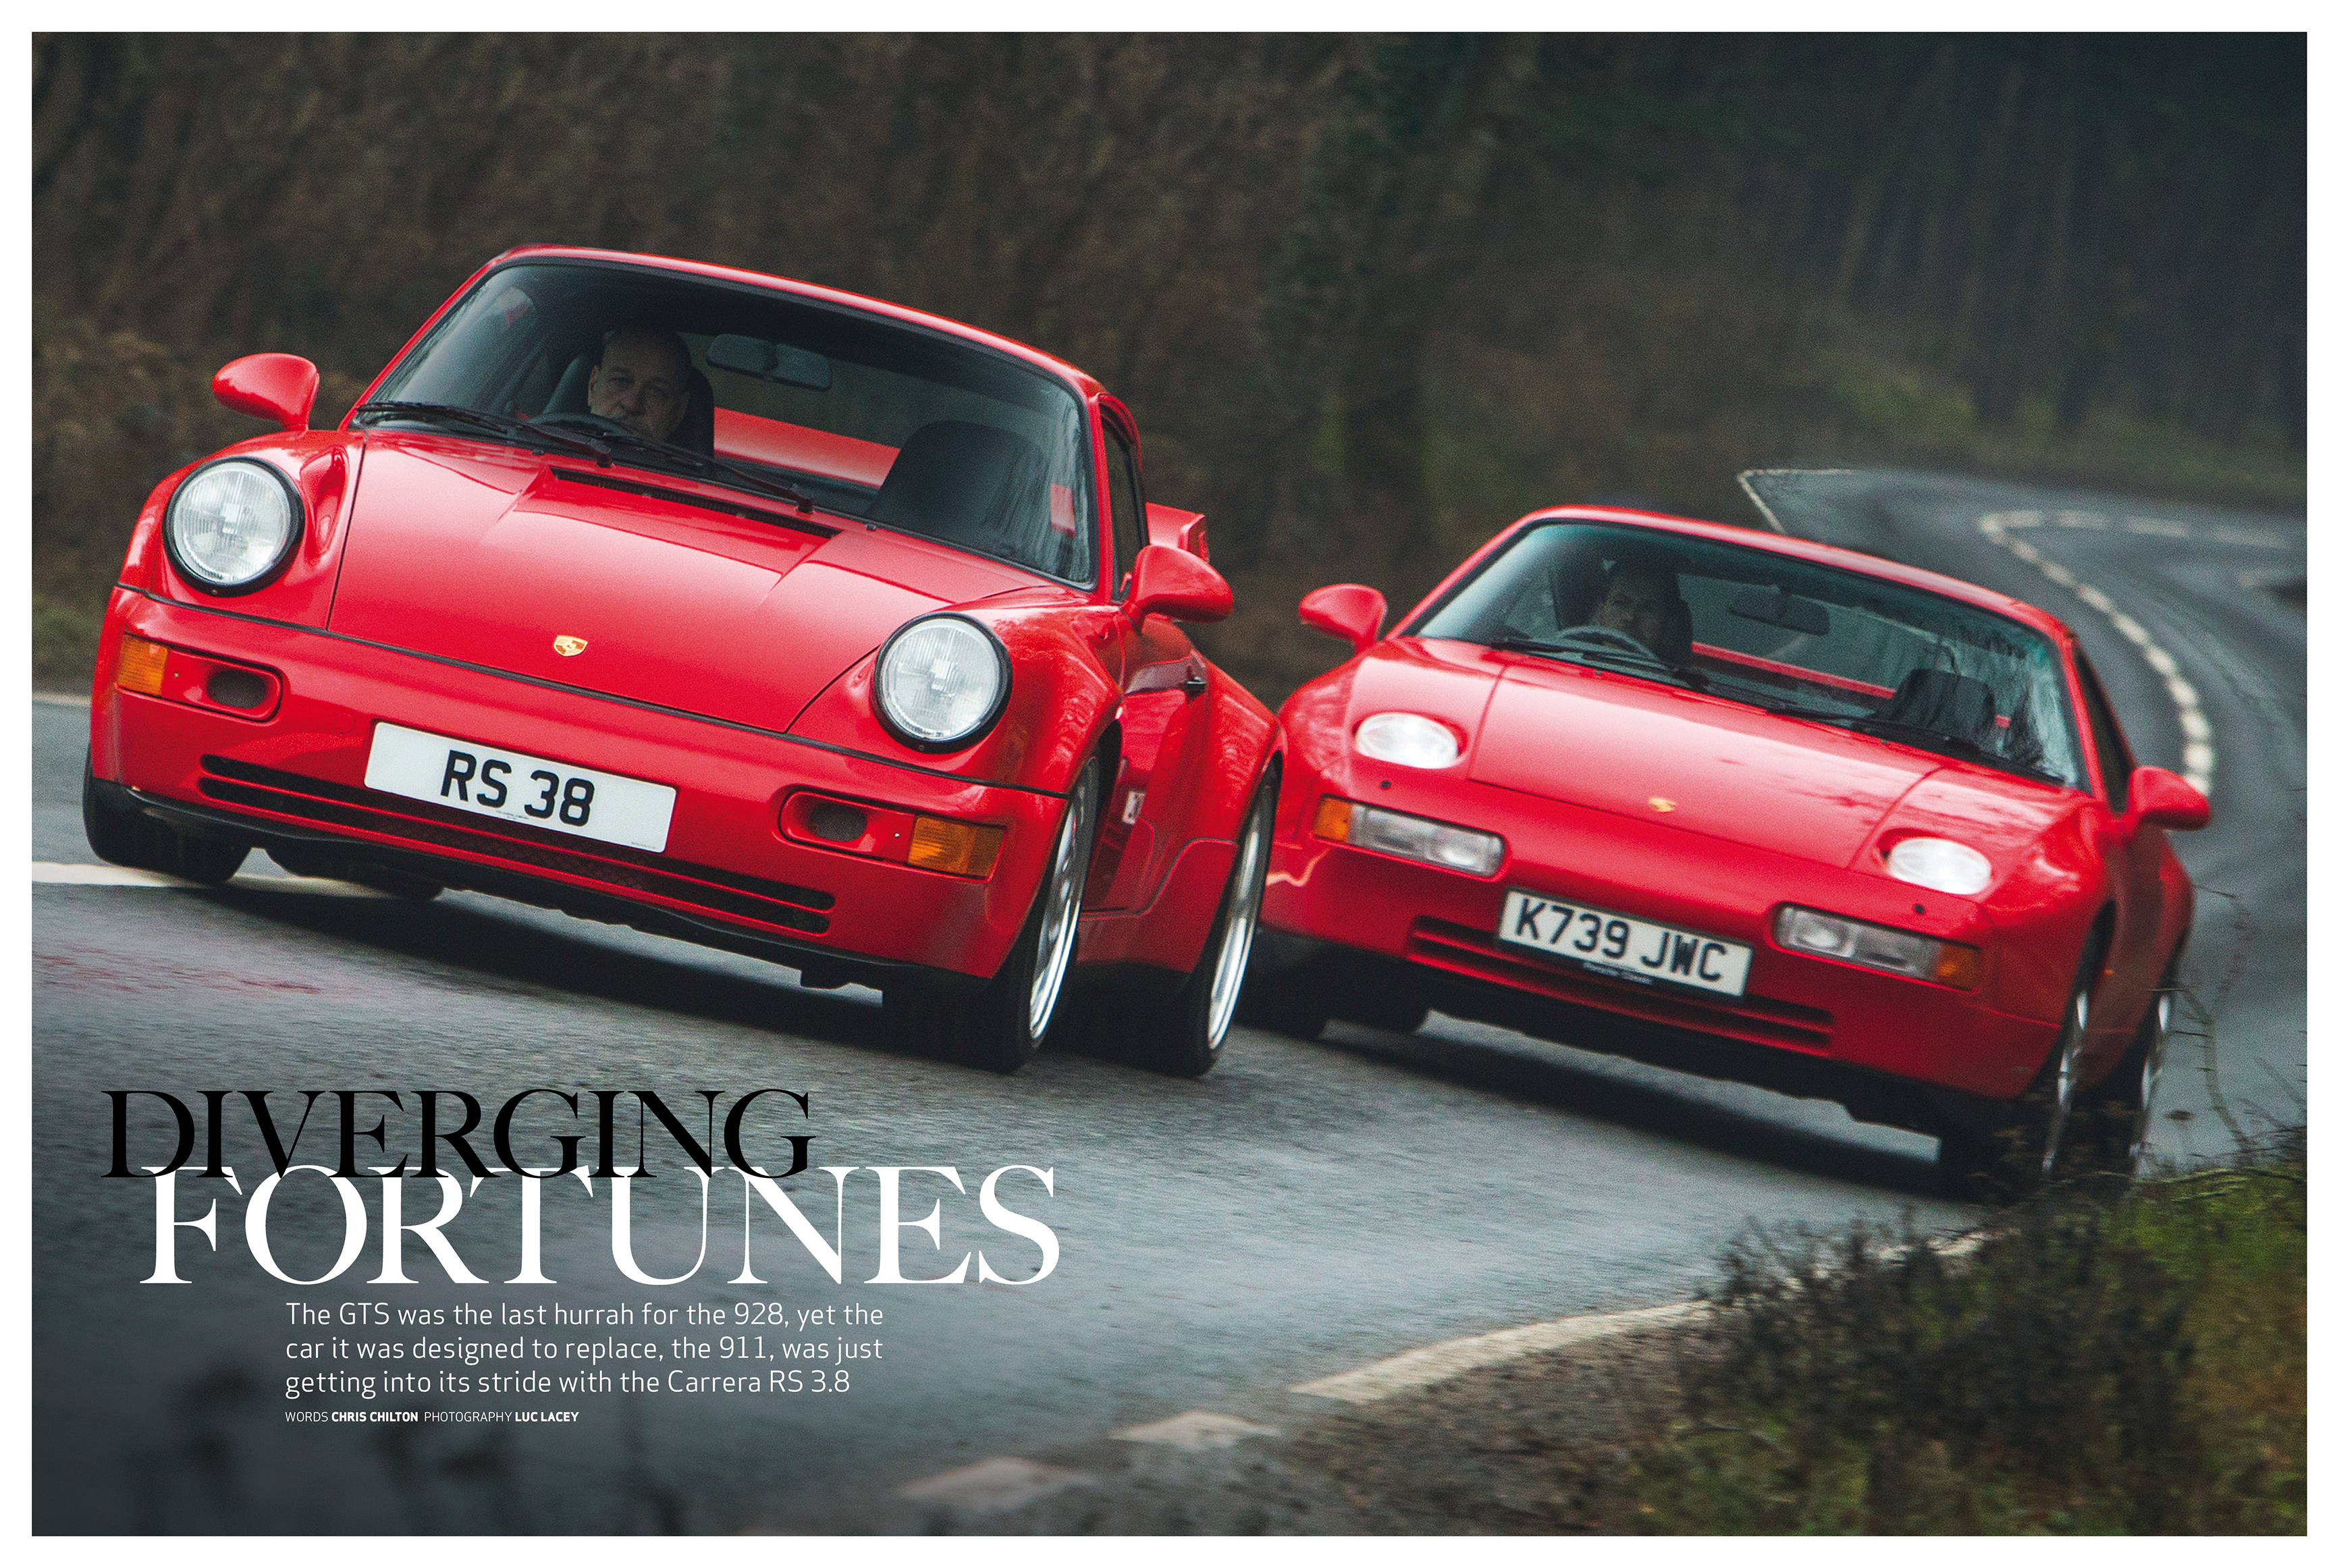 Classic & Sports Car – Porsche dream machines: inside the May 2021 issue of C&SC